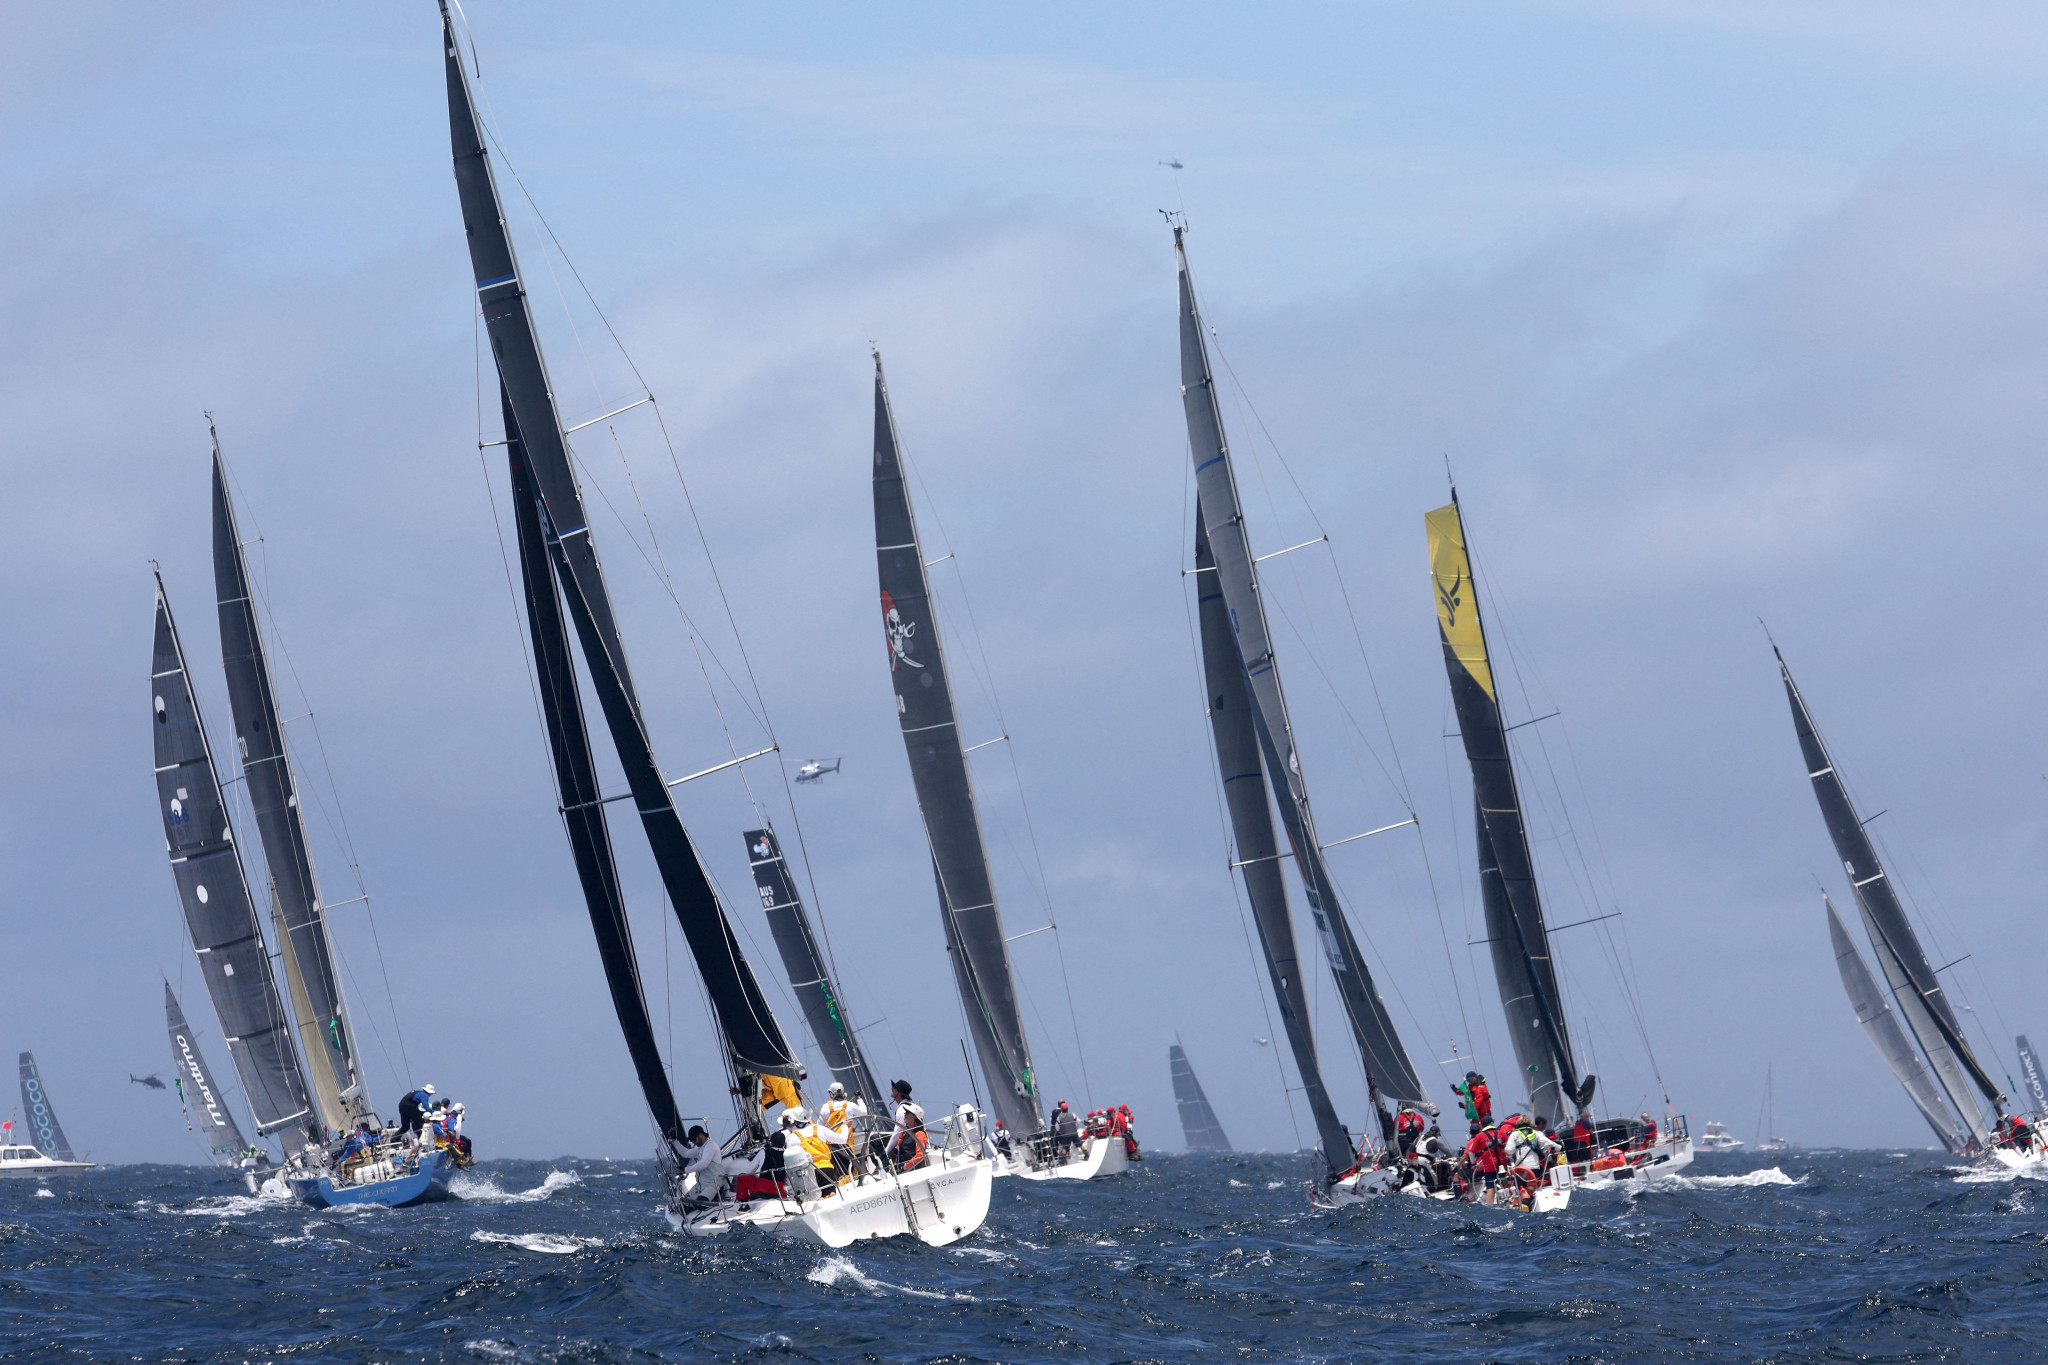 World Sailing sustainability lead named Paris 2024 technical delegate